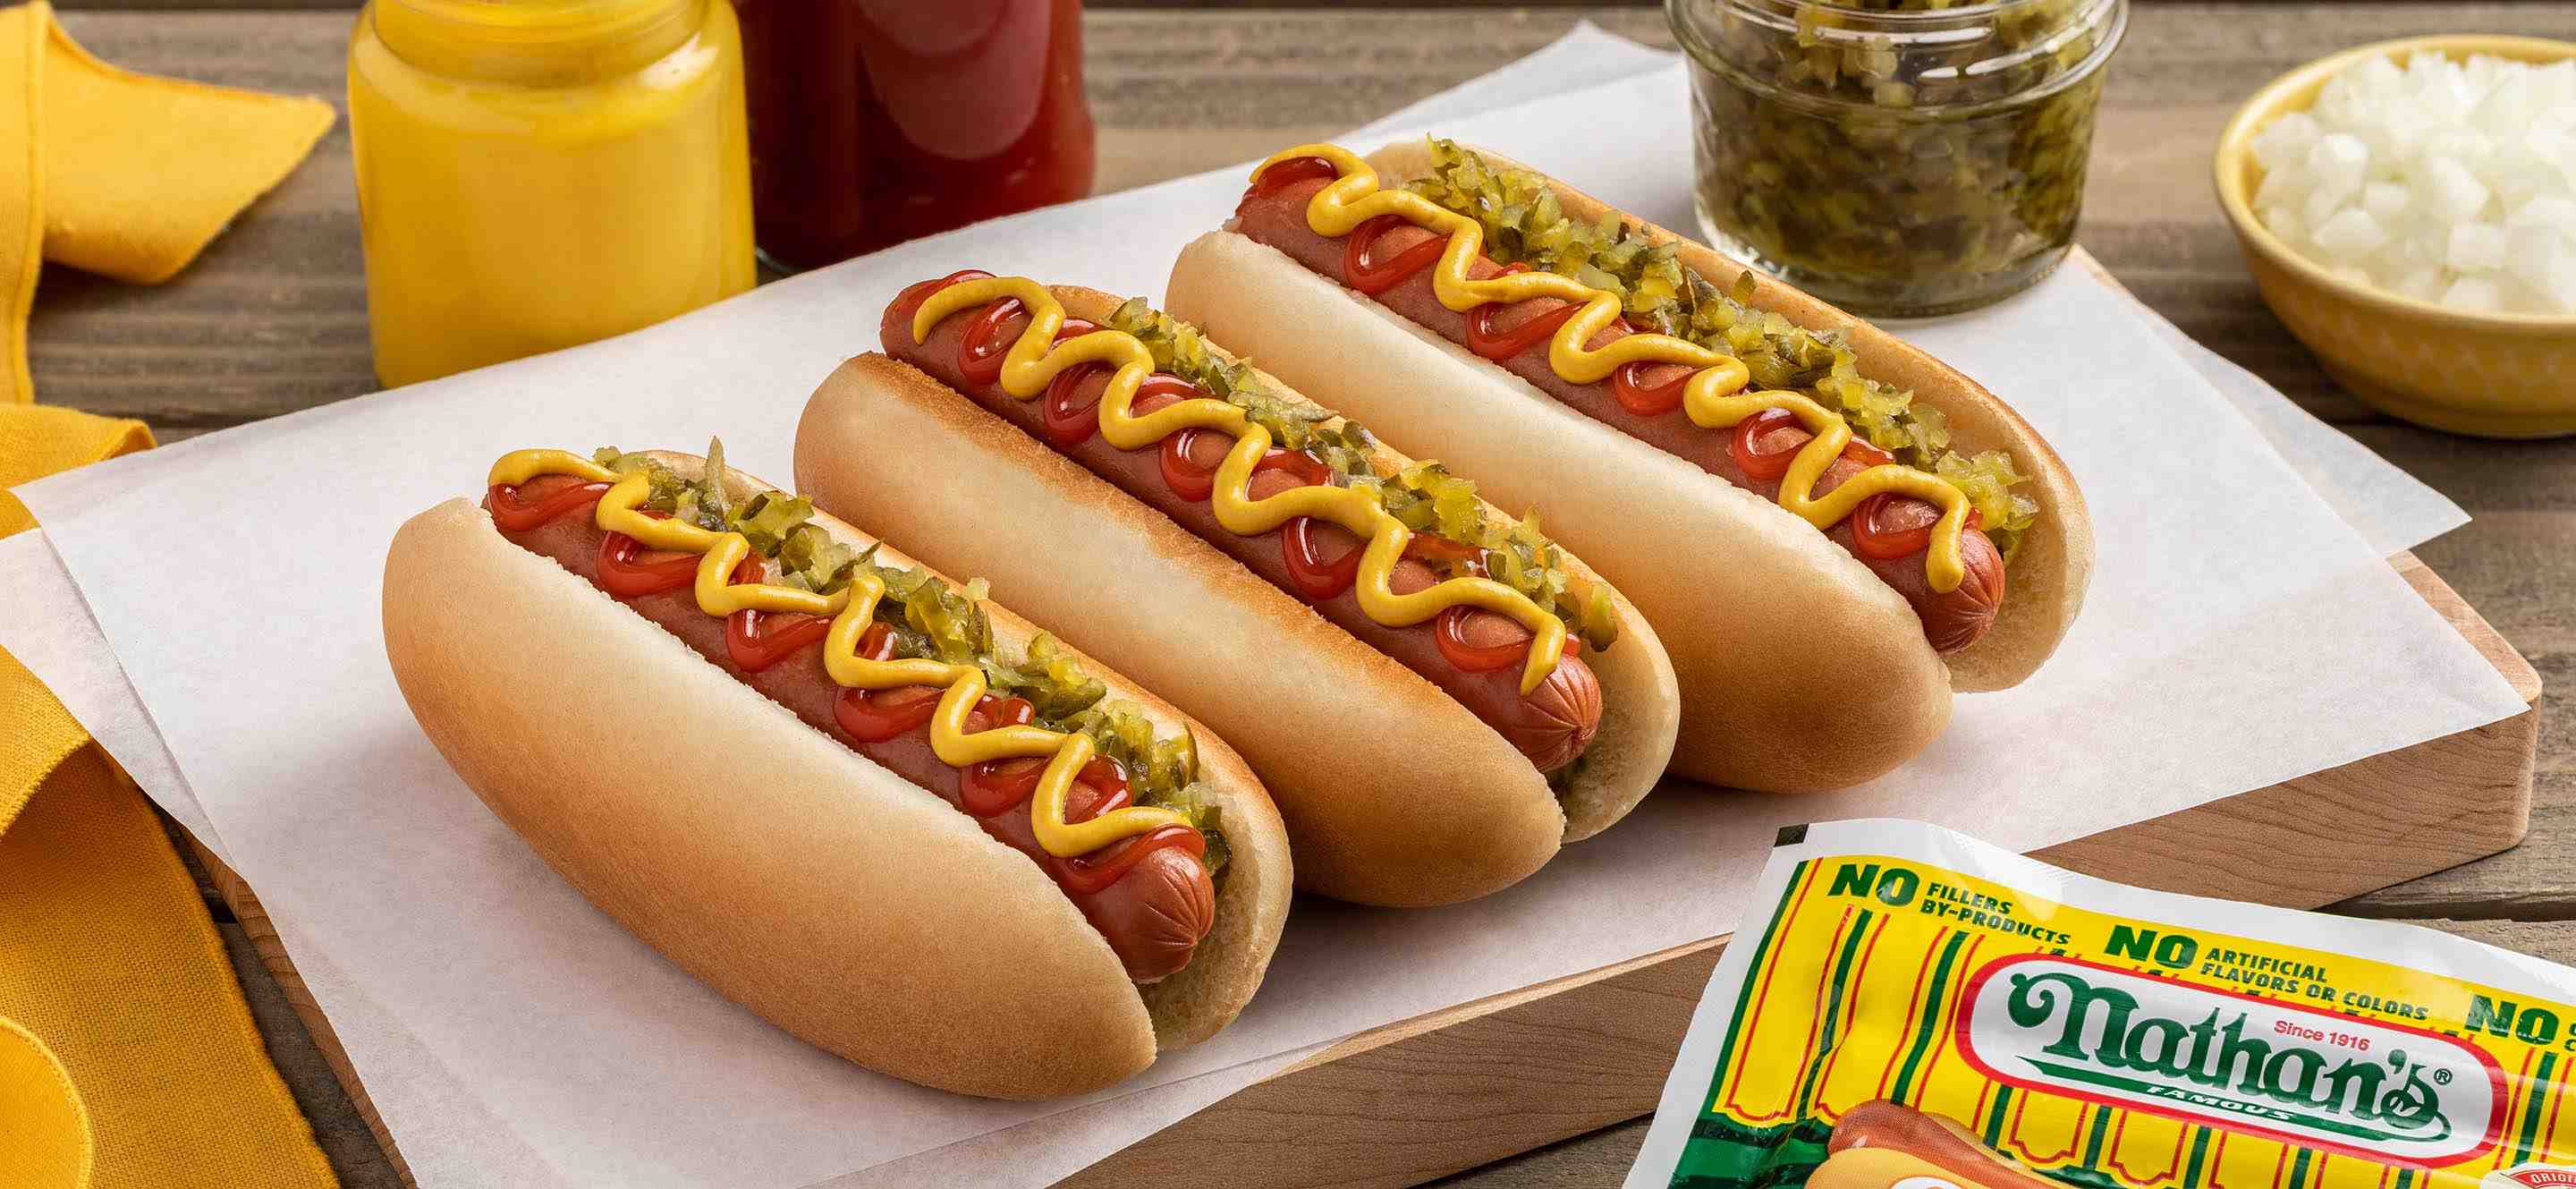 10-nathans-hot-dog-nutrition-facts